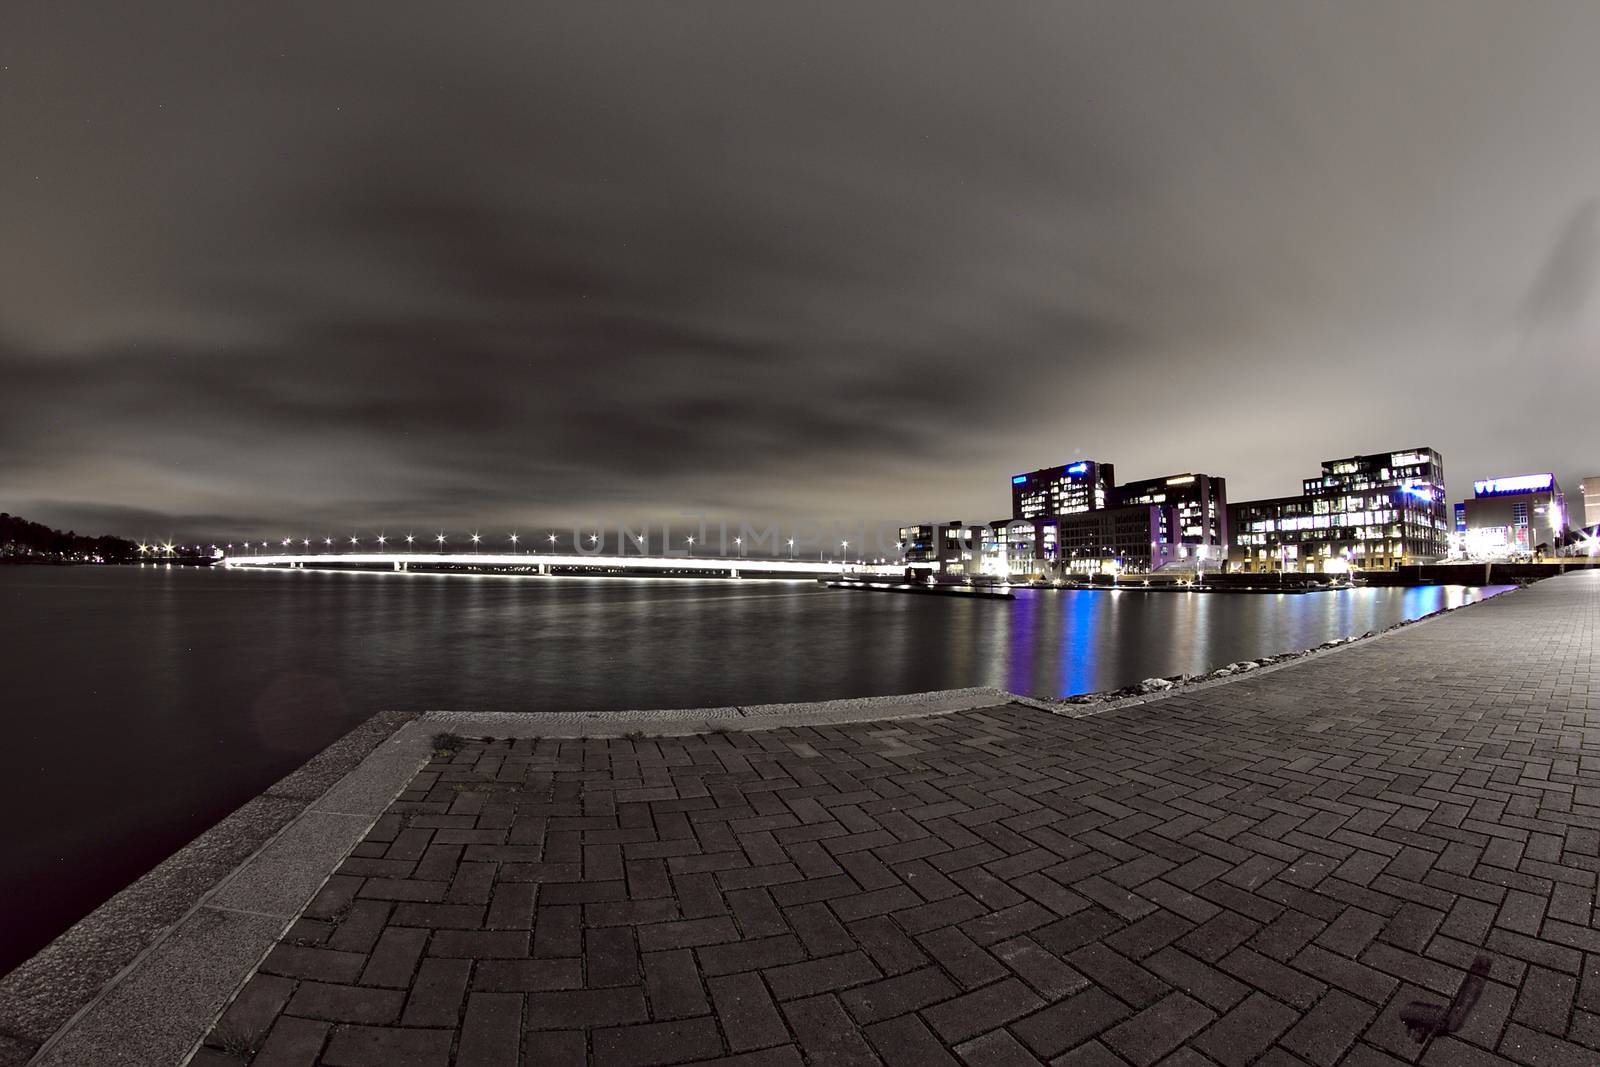 Low angle night photo of Helsinki Salmisaari at night. Long lighted bridge and colorful office buildings on the background of a black and white night photo.